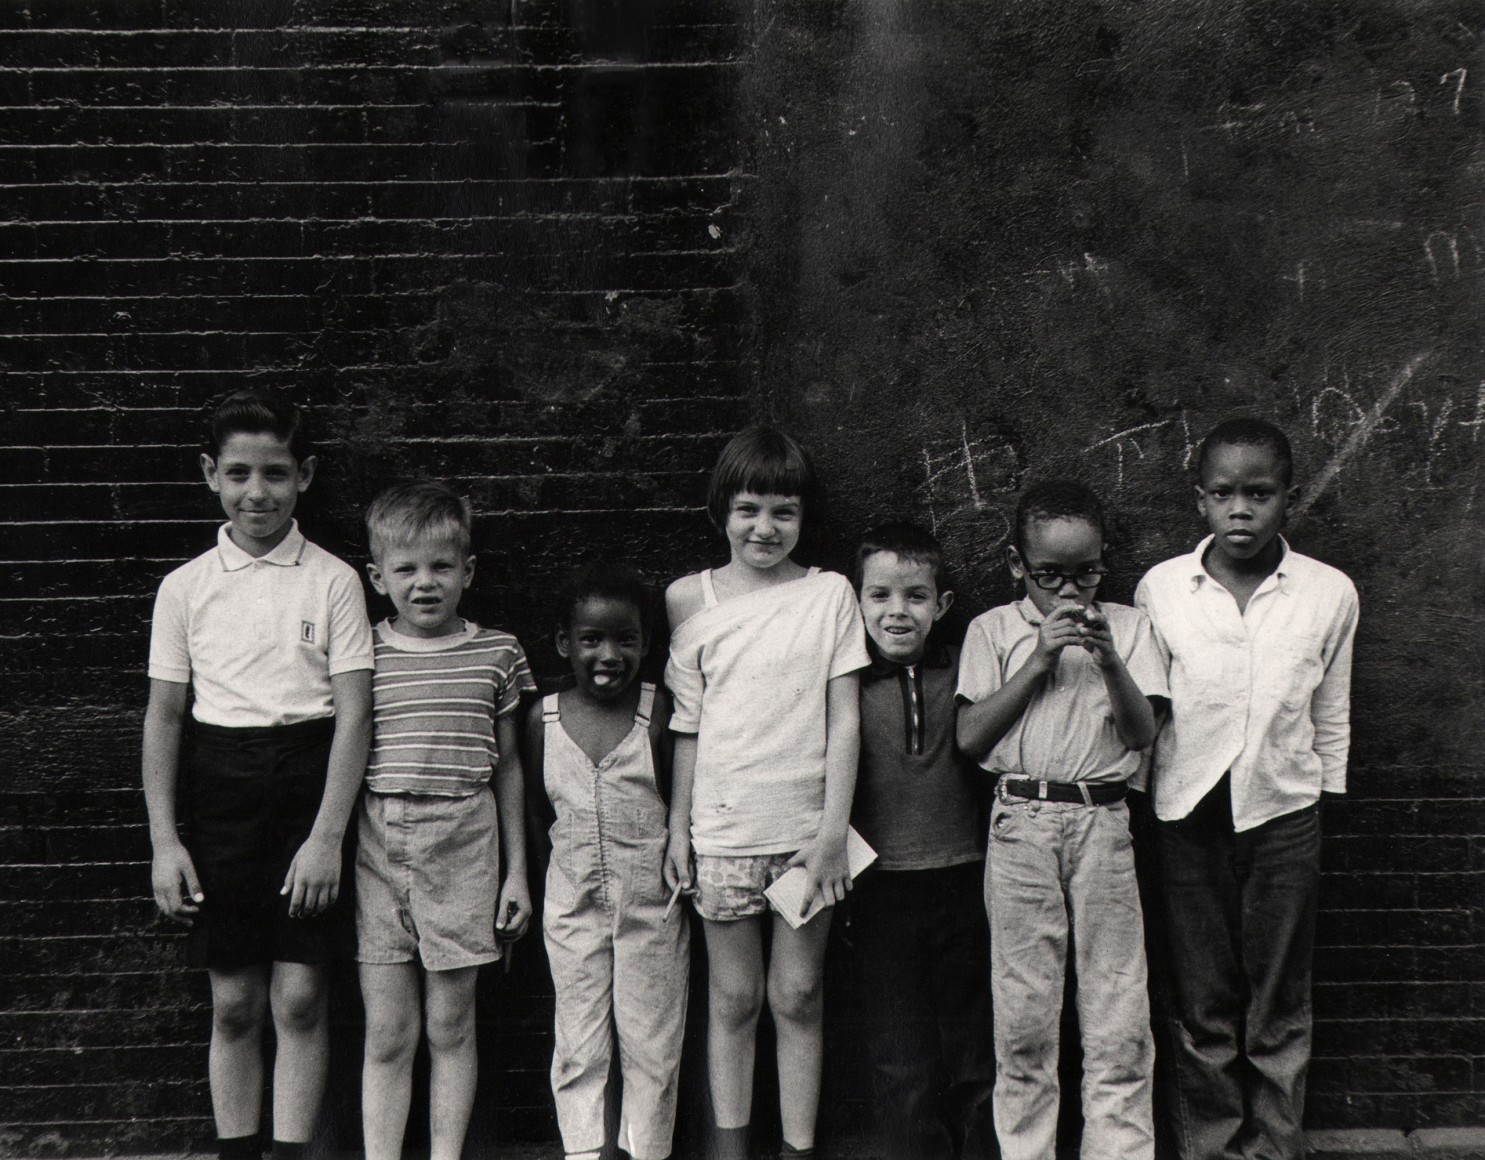 26. Beuford Smith, 7 Kids, Lower East Side, ​1965. A line of children standing against a dark brick wall.